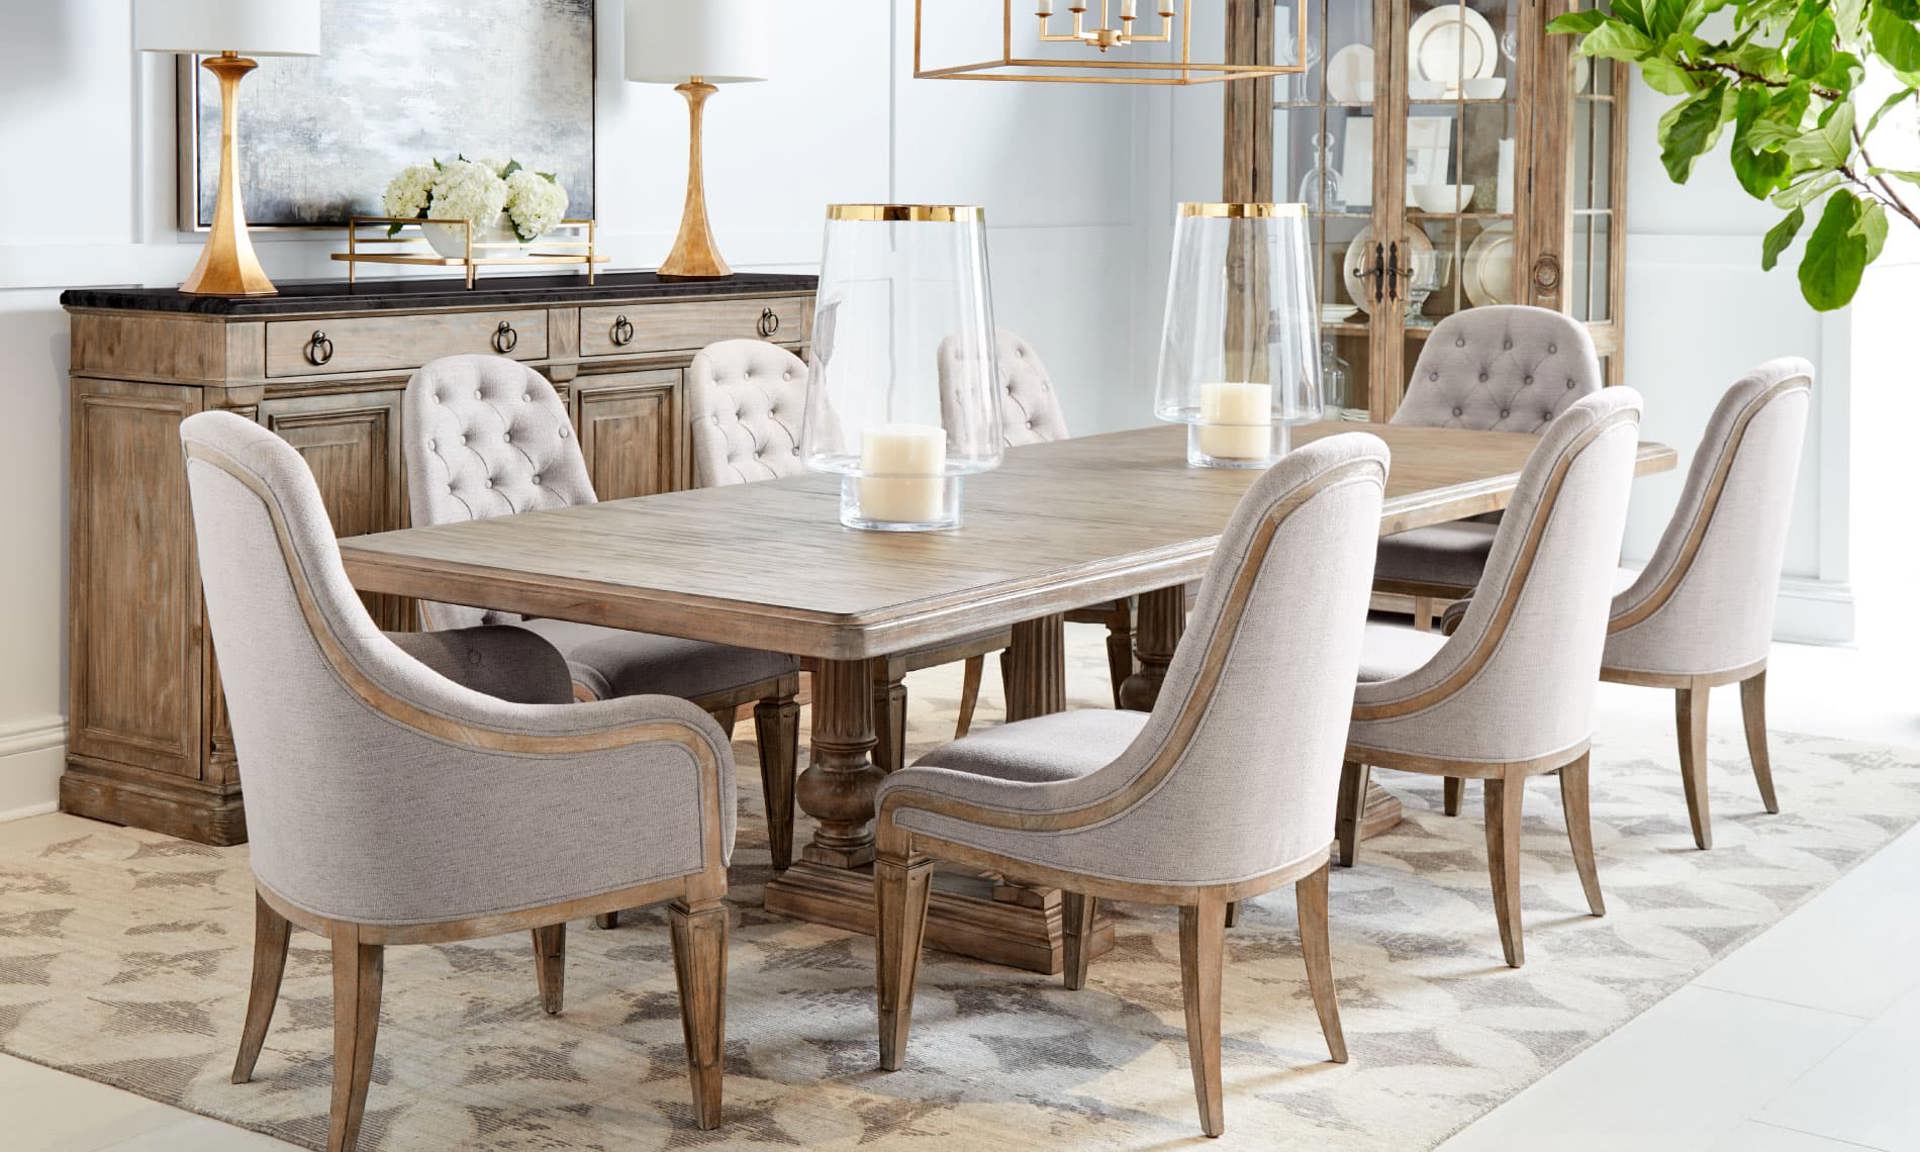 Shop dining sets in a variety of styles, colors and sizes!